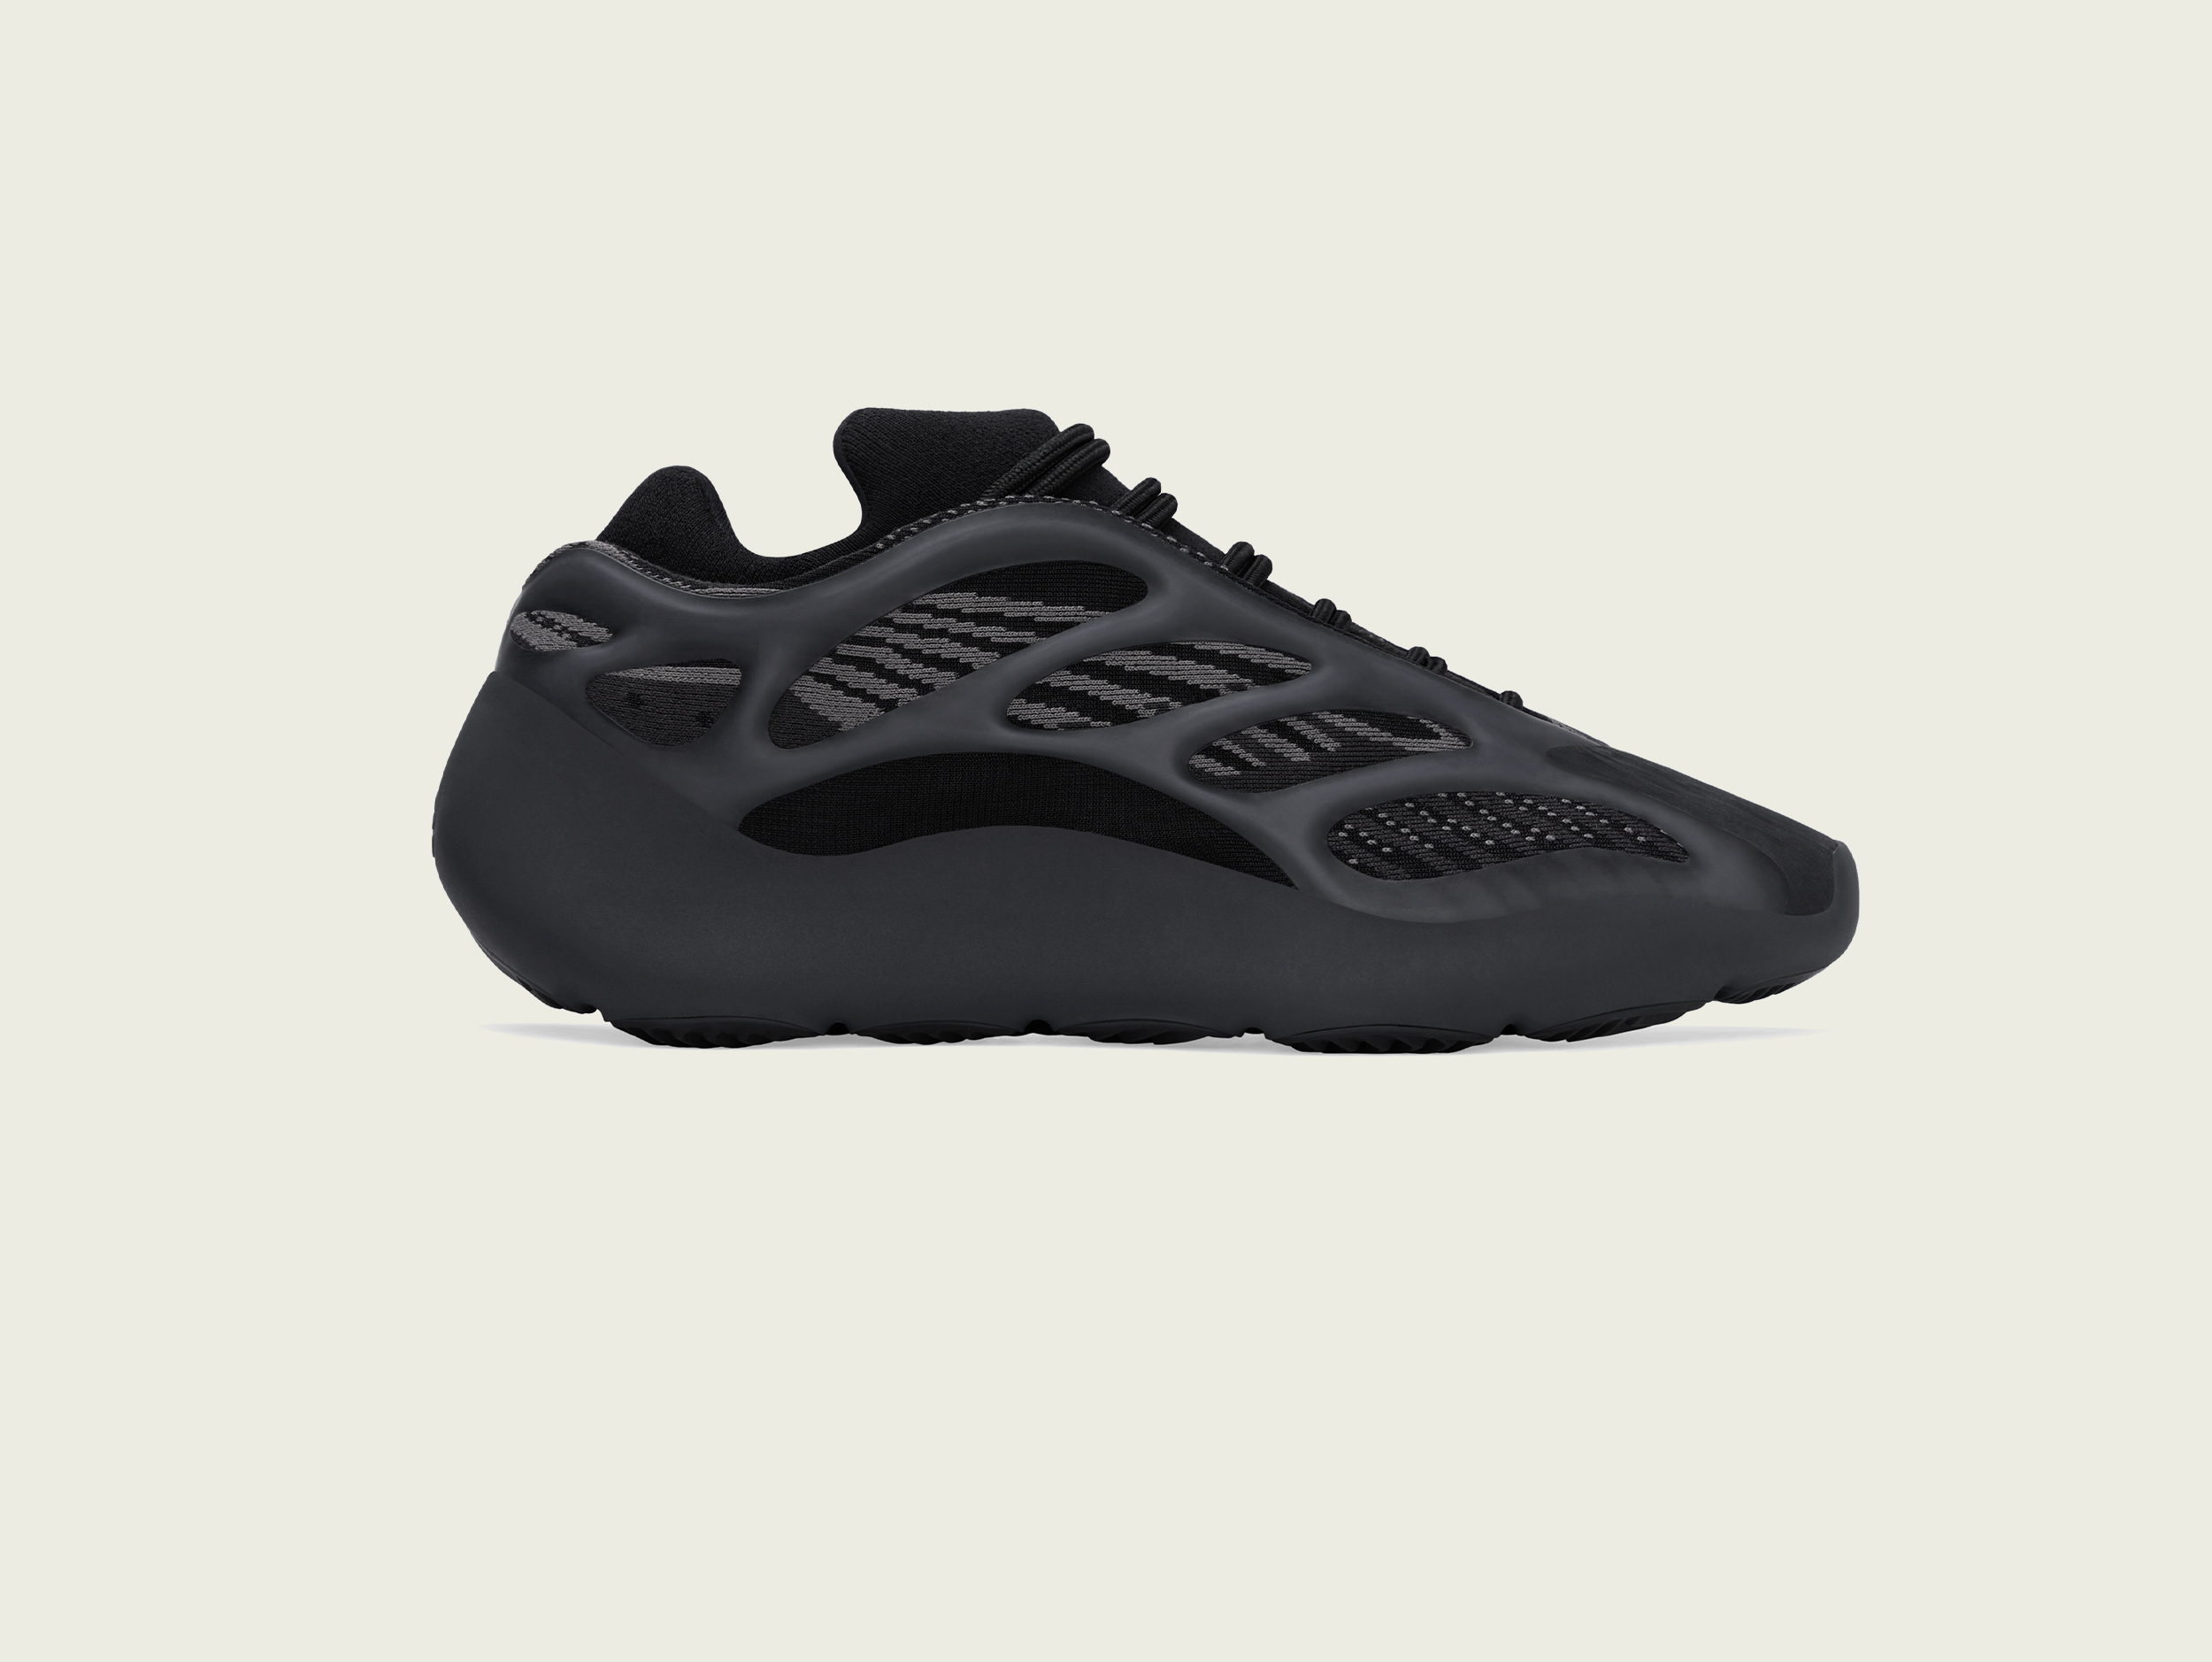 yeezy boost 700 price in south africa